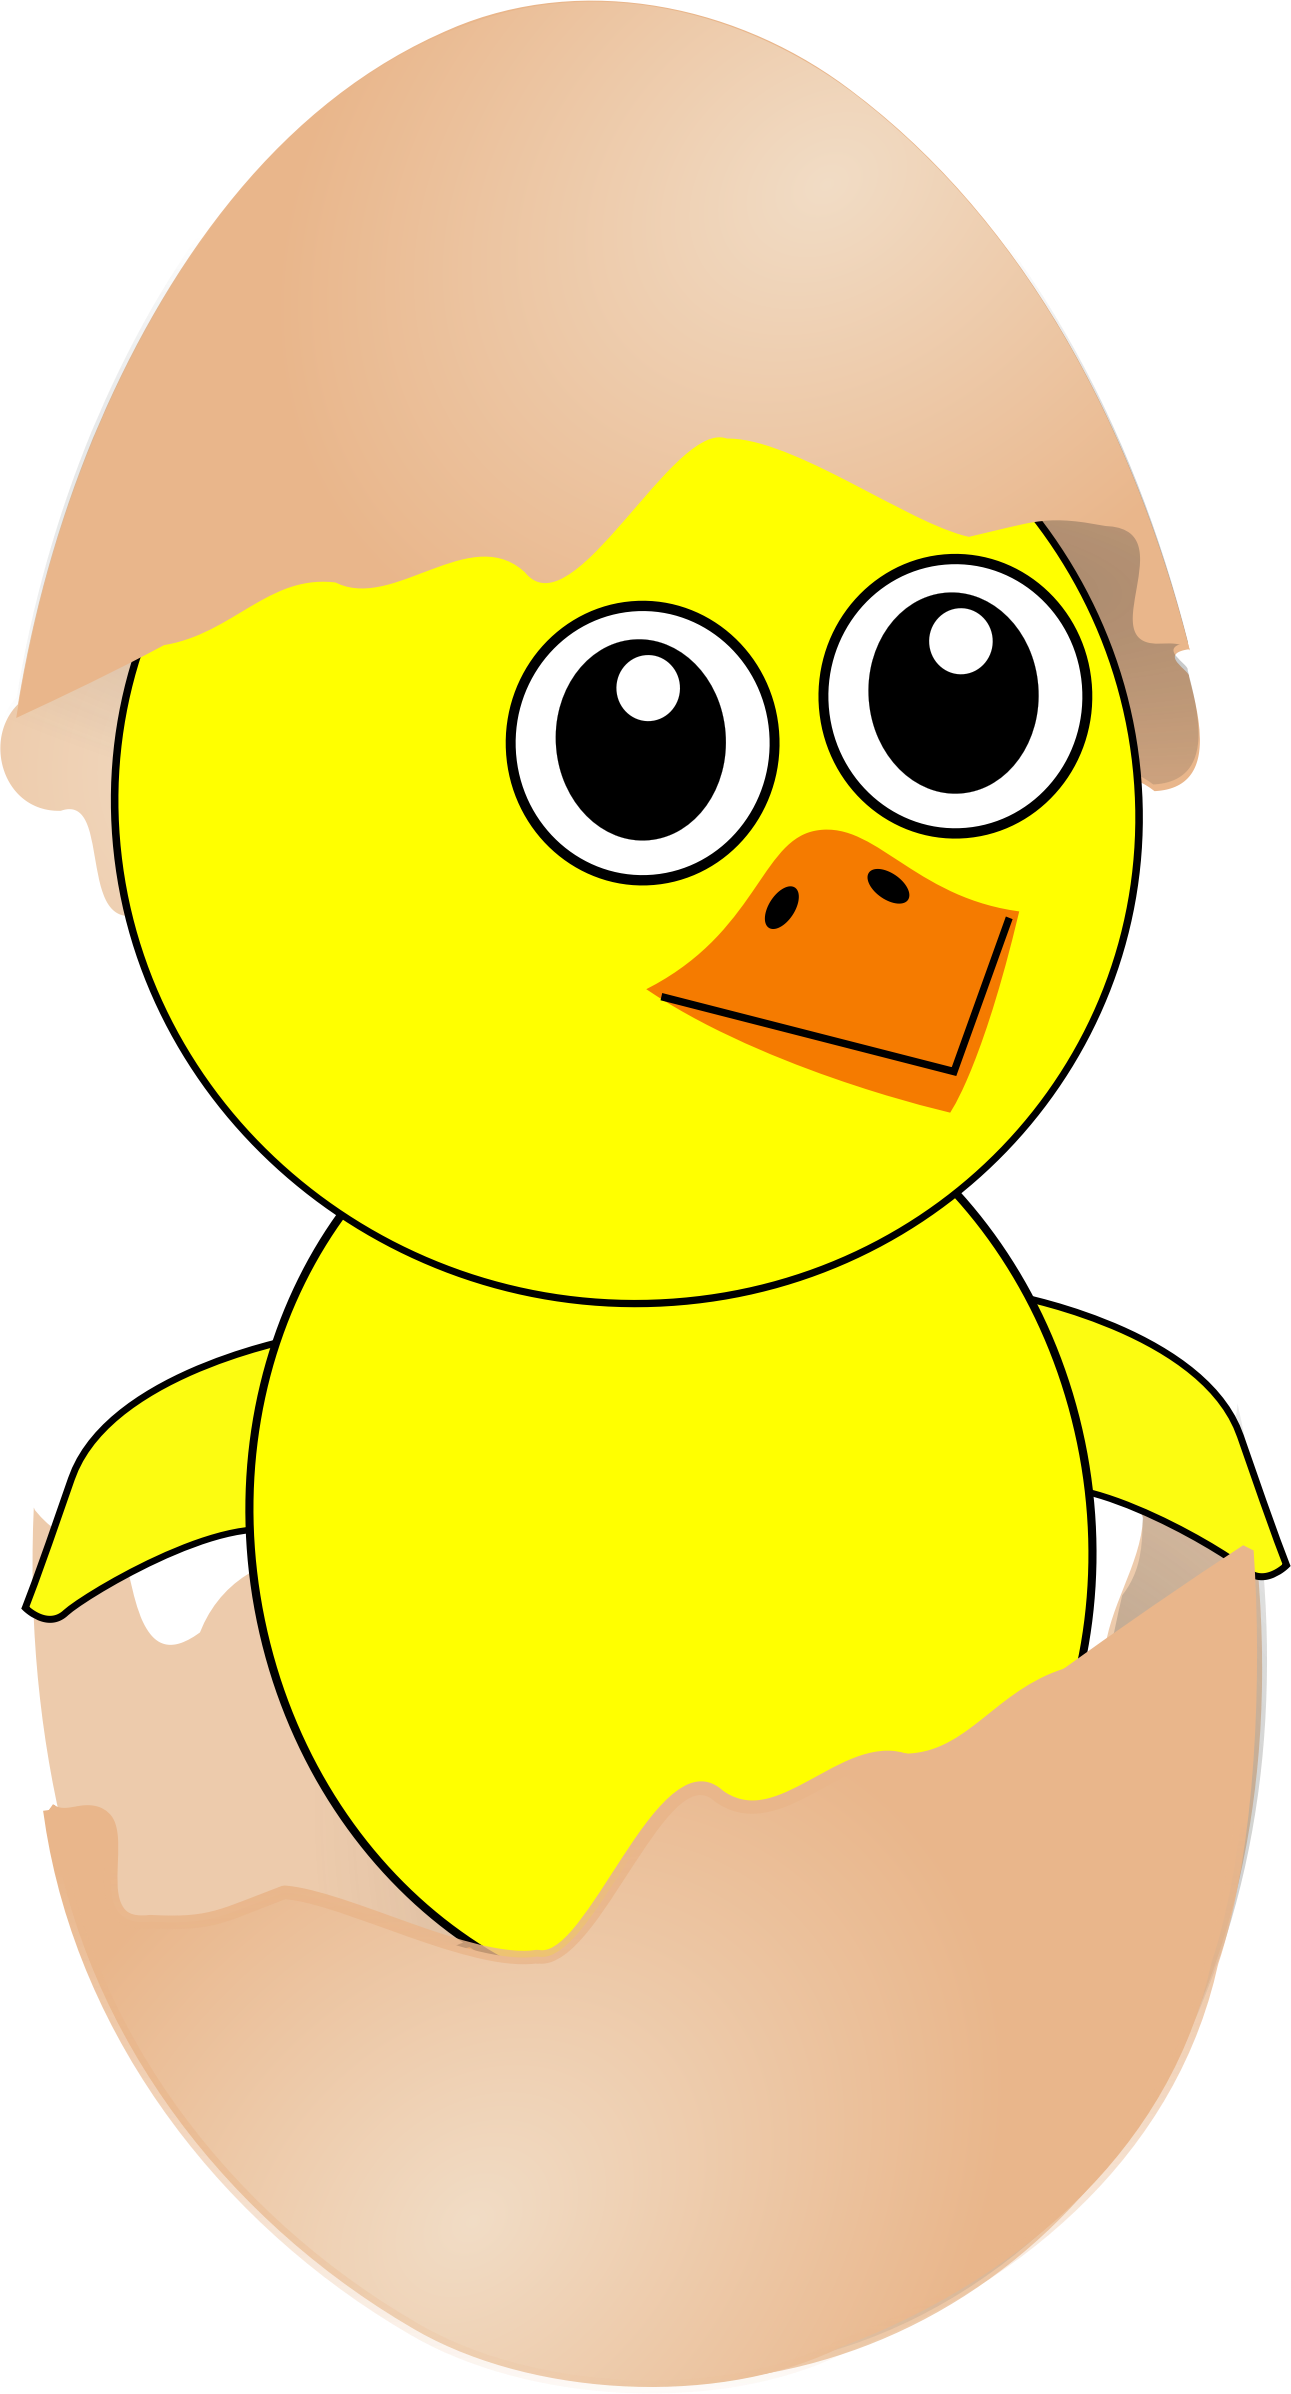 Easter chick cartoon clipart